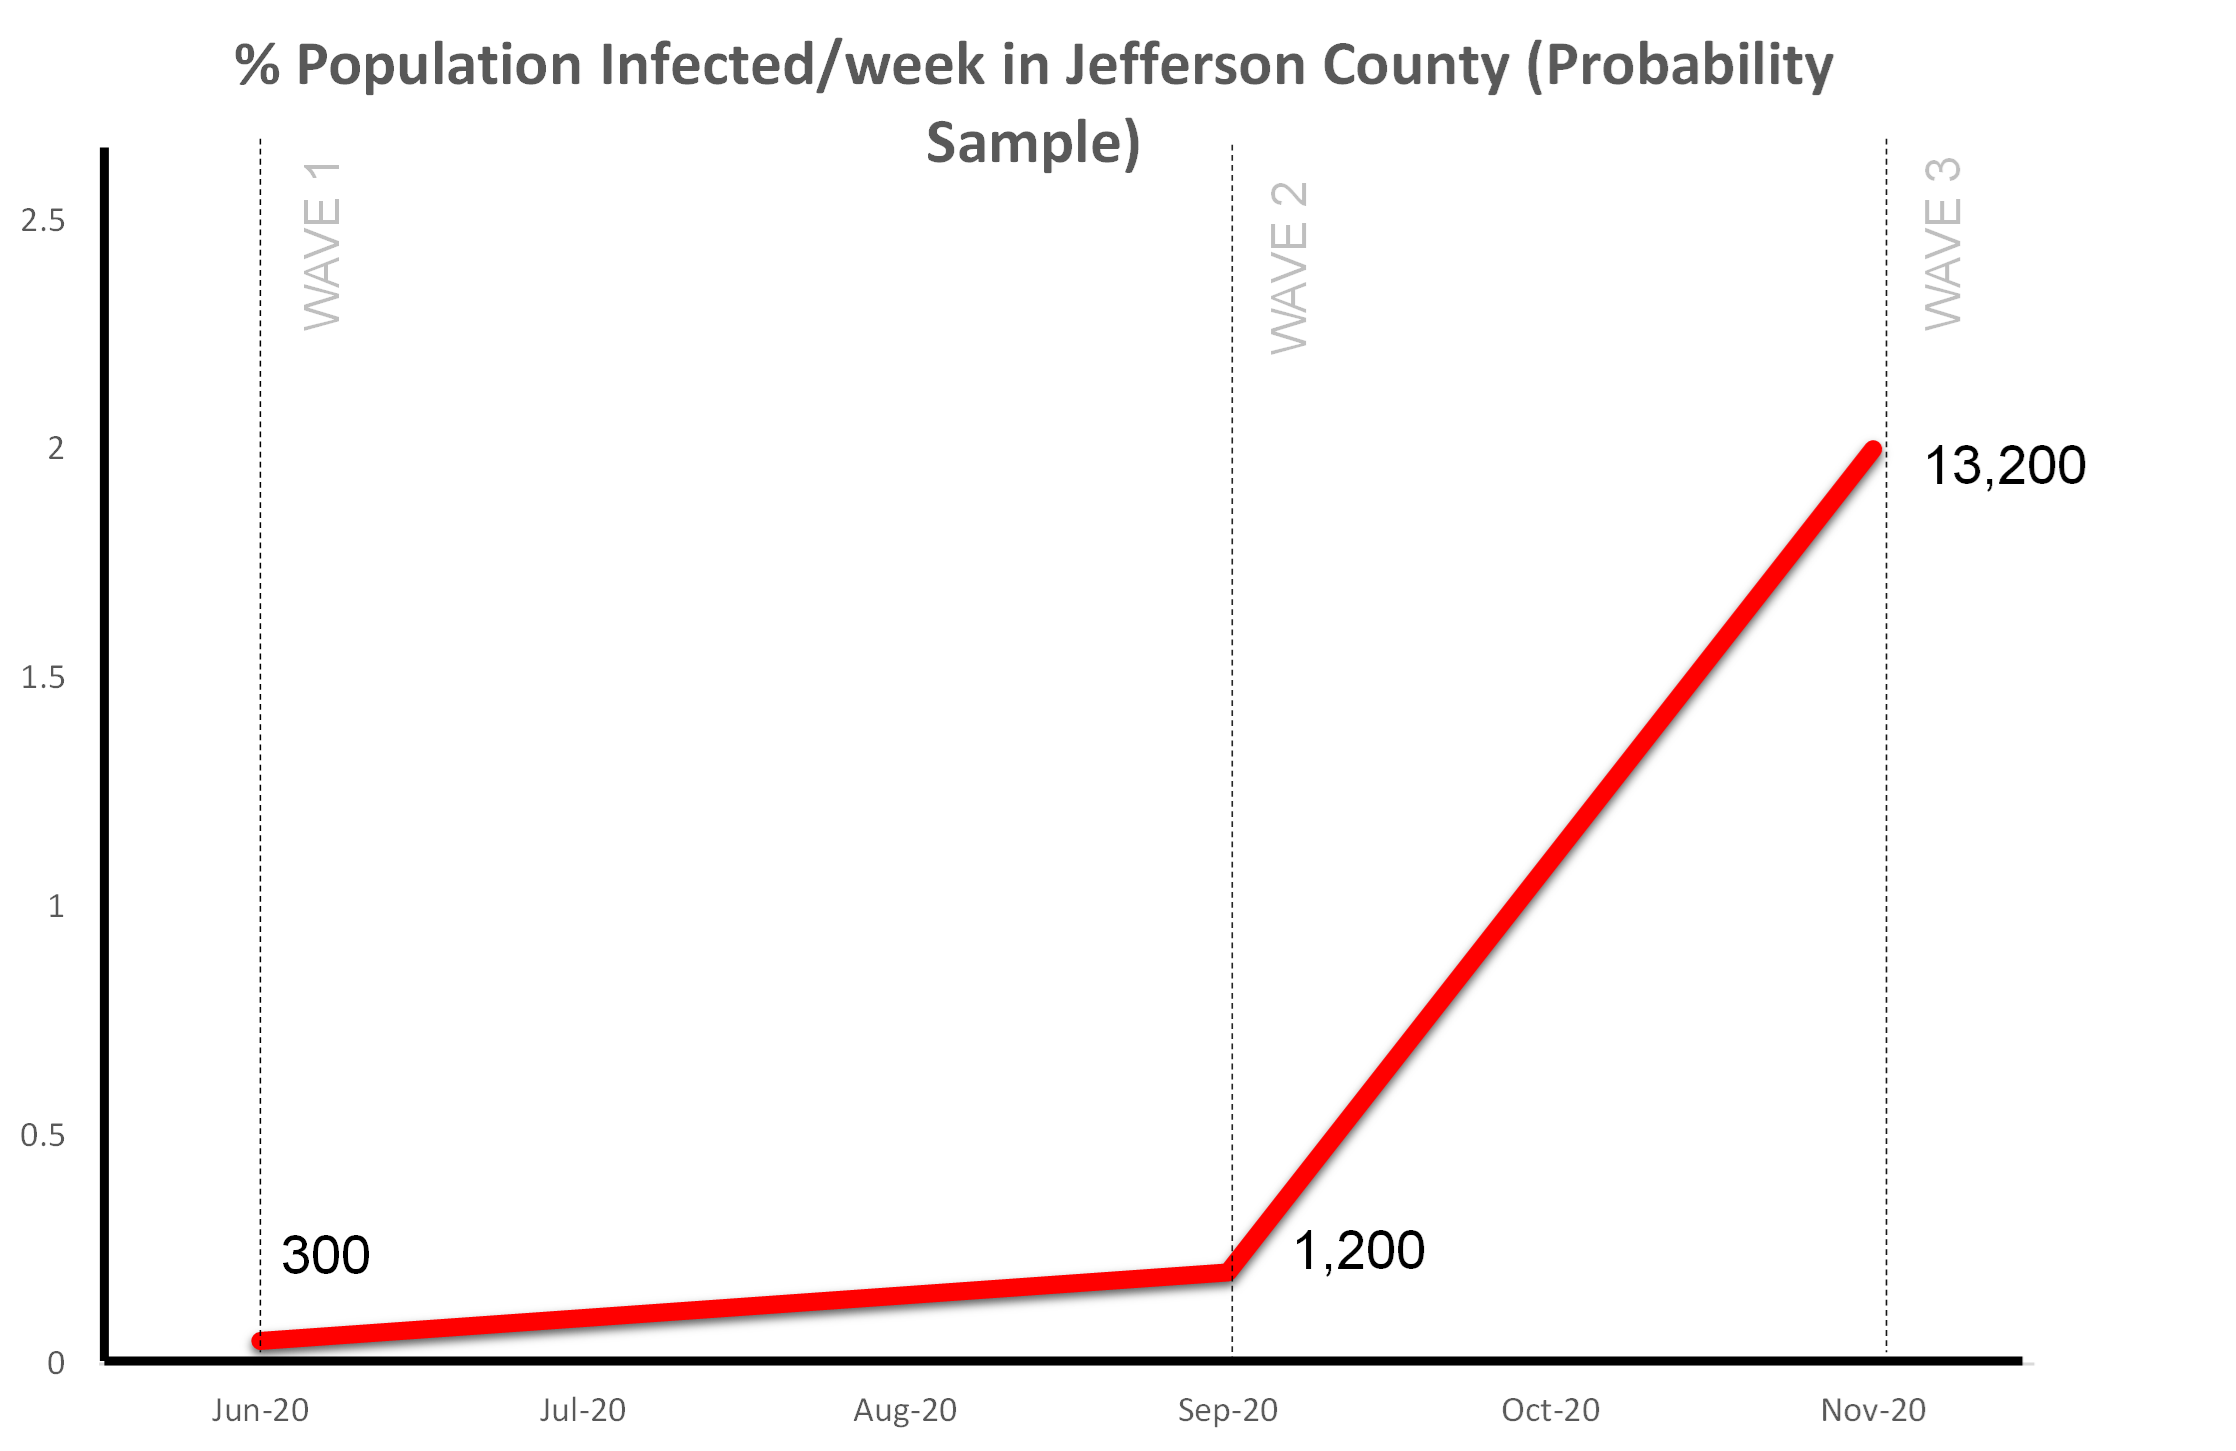 This graph shows the estimated number of individuals in Jefferson County with active COVID-19 infection based on random testing of the population by researchers with the Co-Immunity Project.